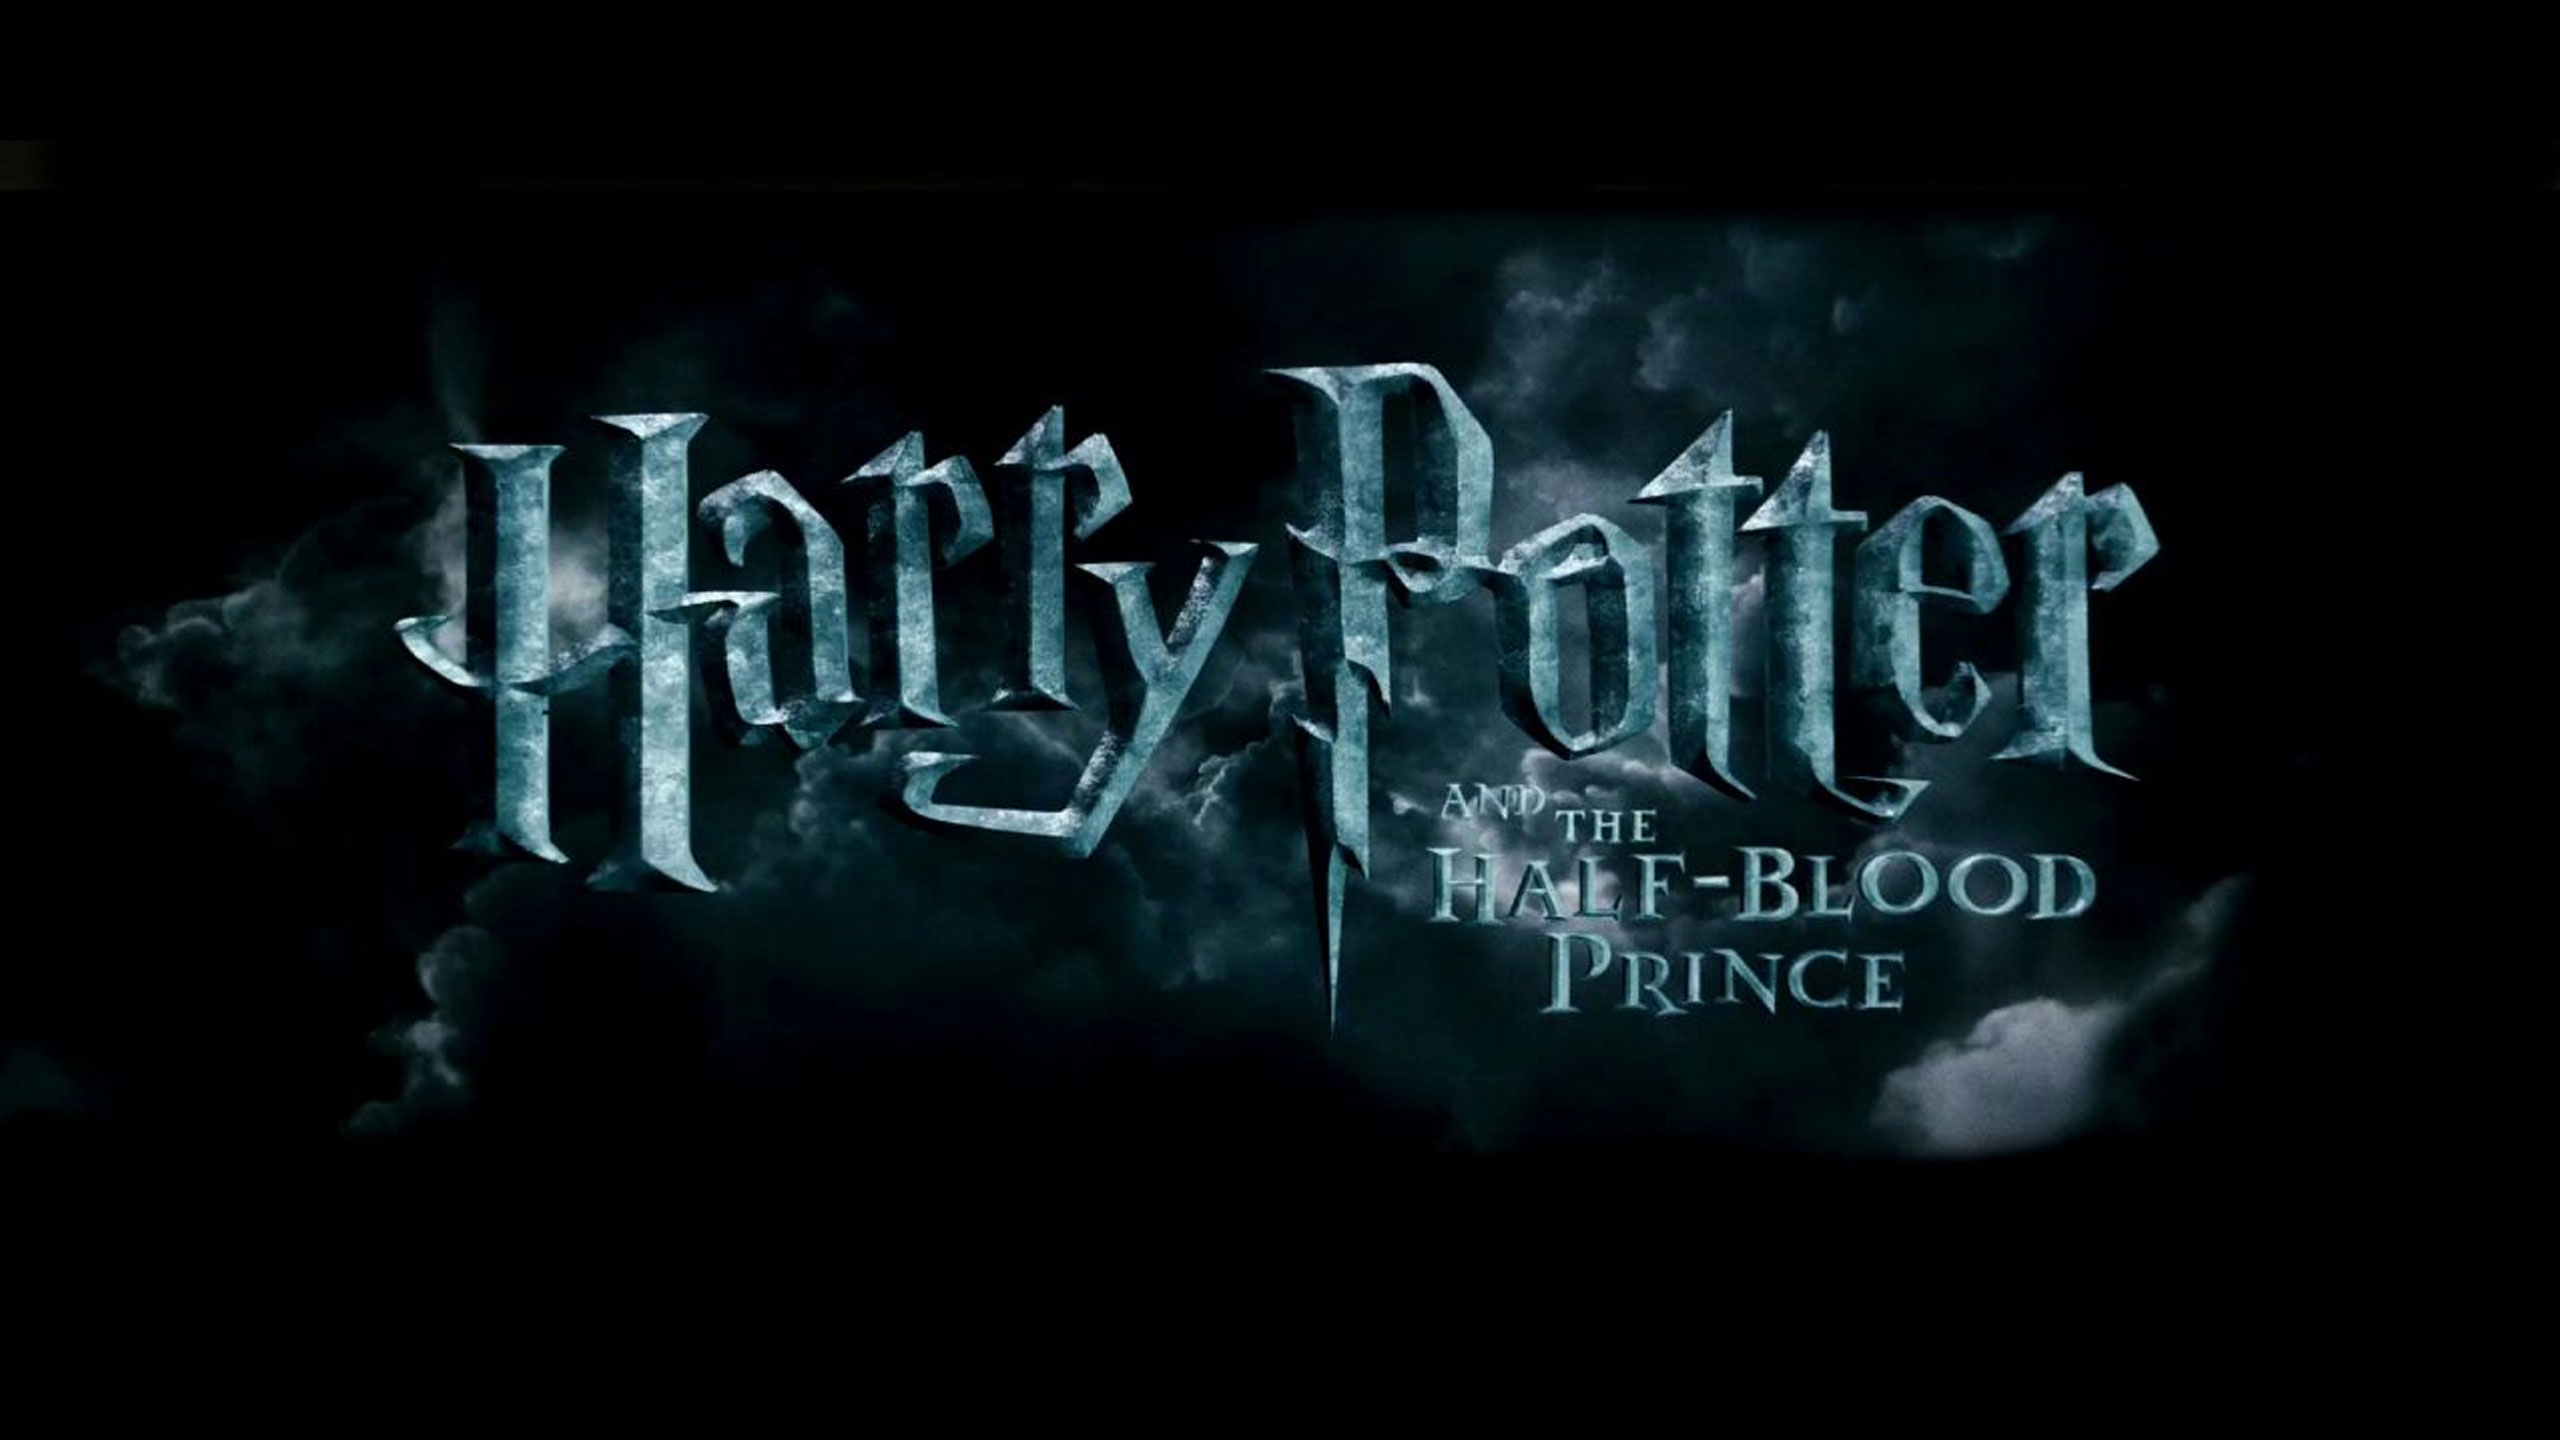 download the new for android Harry Potter and the Half-Blood Prince